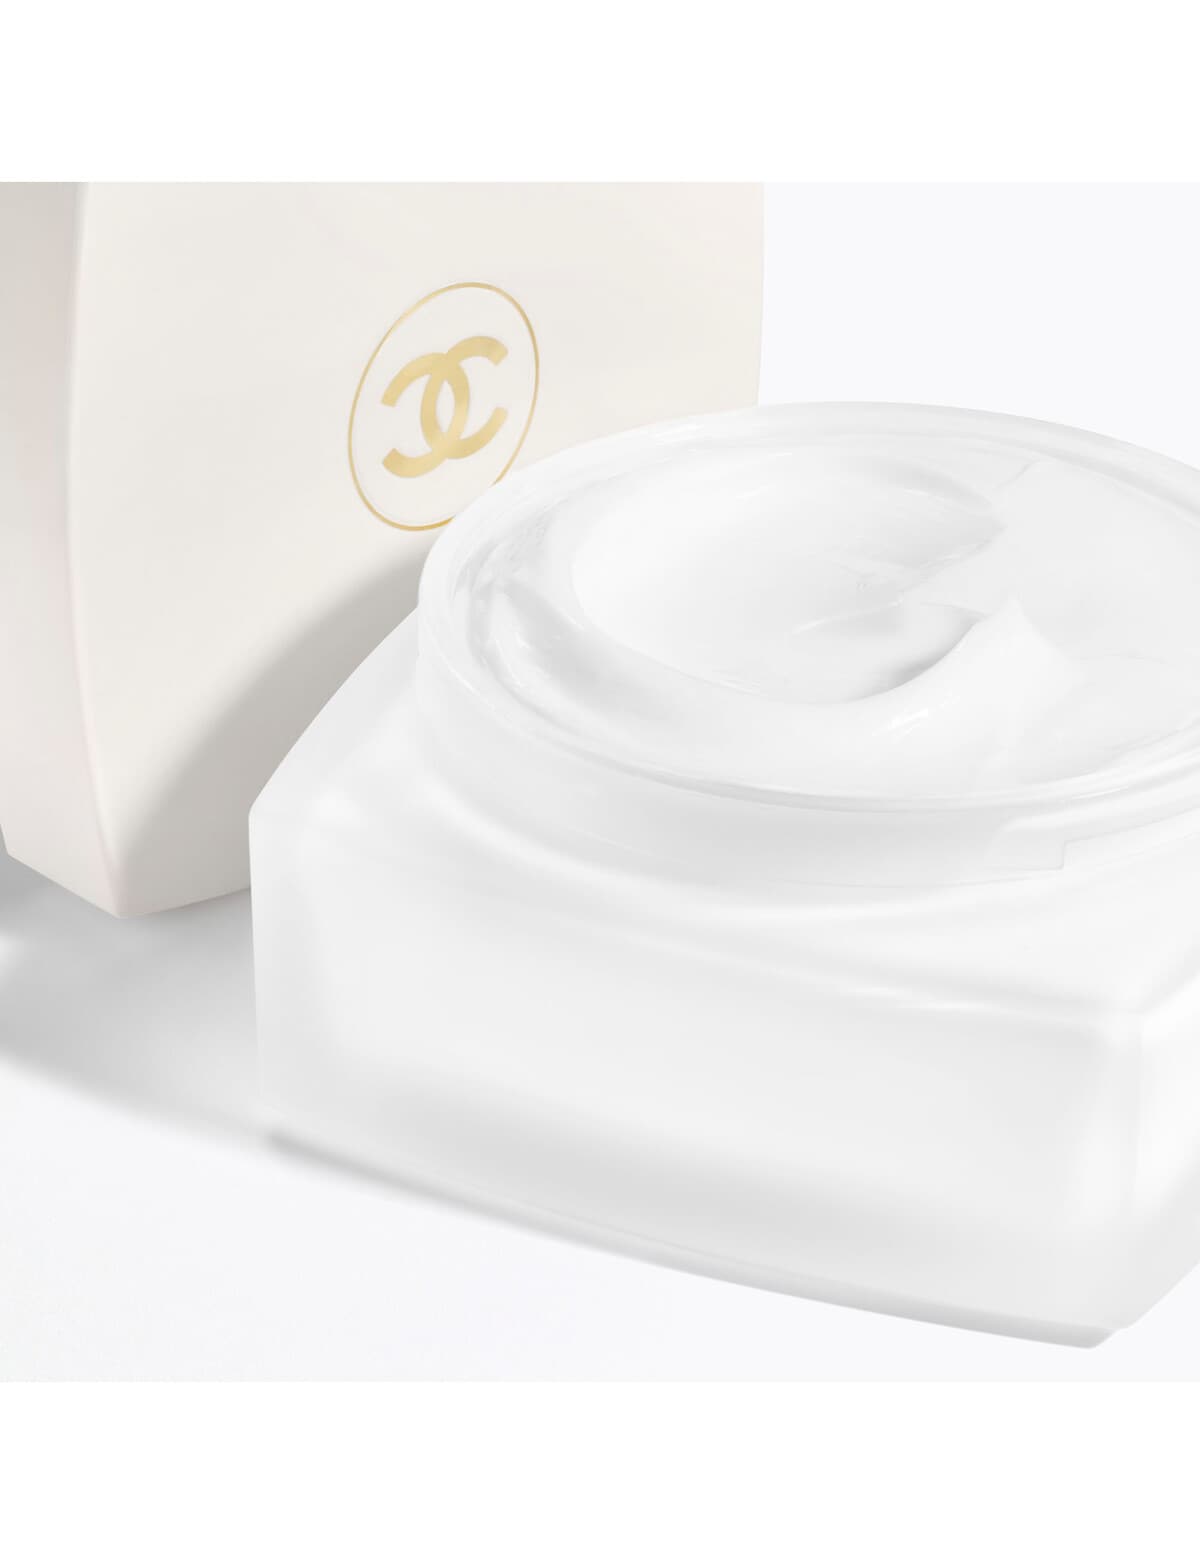 CHANEL N°5 The Body Lotion